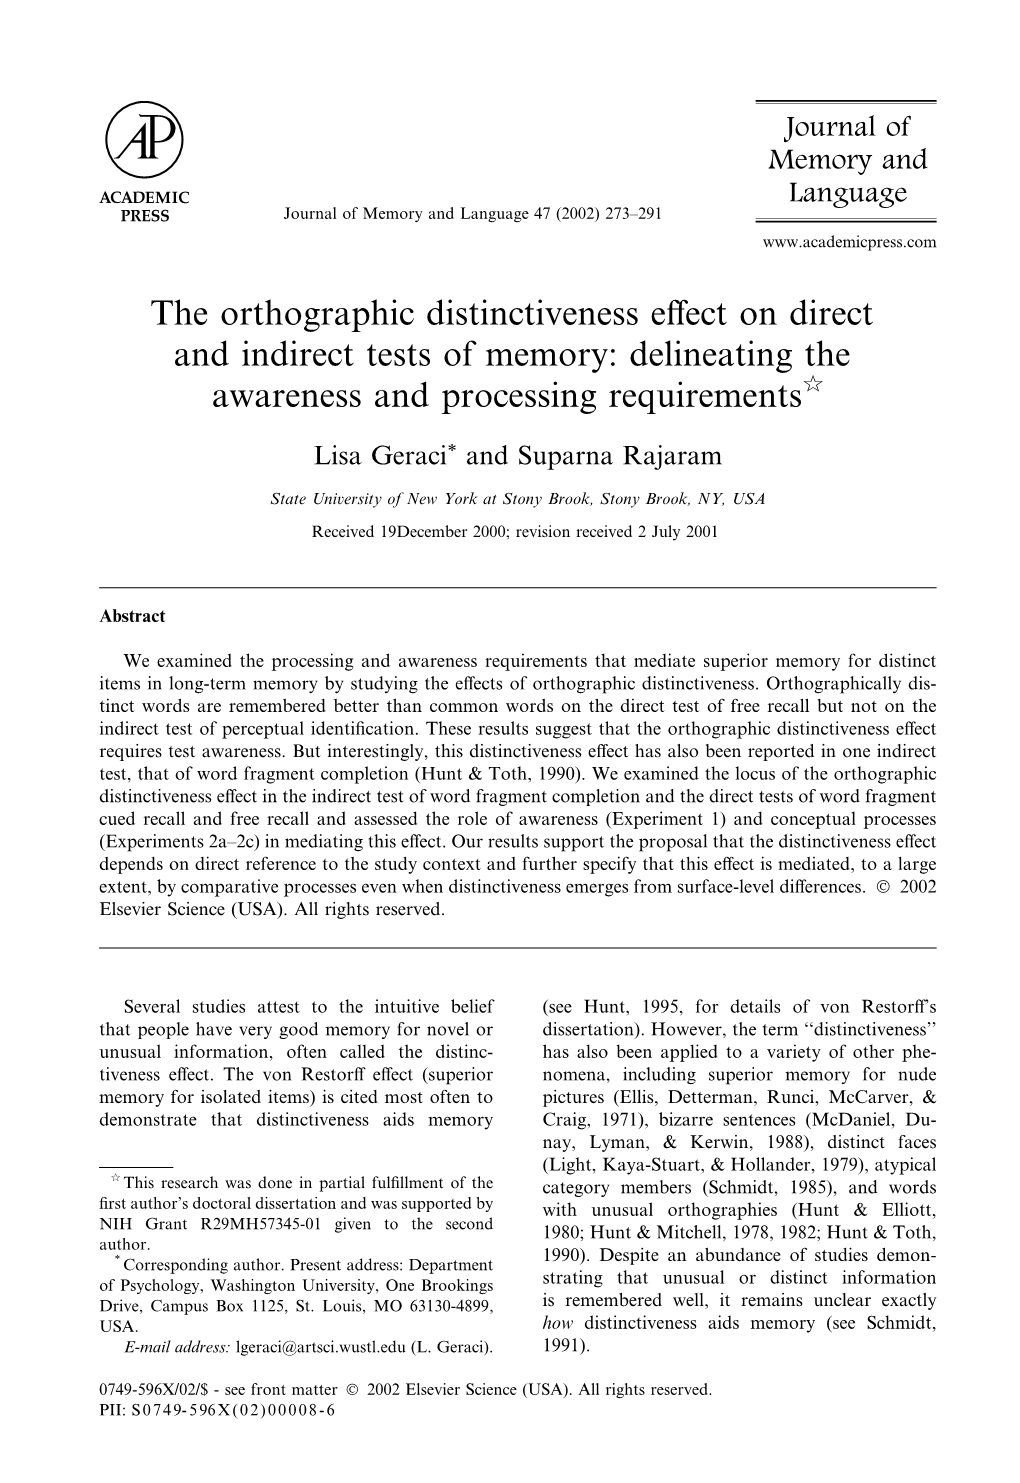 The Orthographic Distinctiveness Effect on Direct and Indirect Tests of Memory: Delineating the Awareness and Processing Require